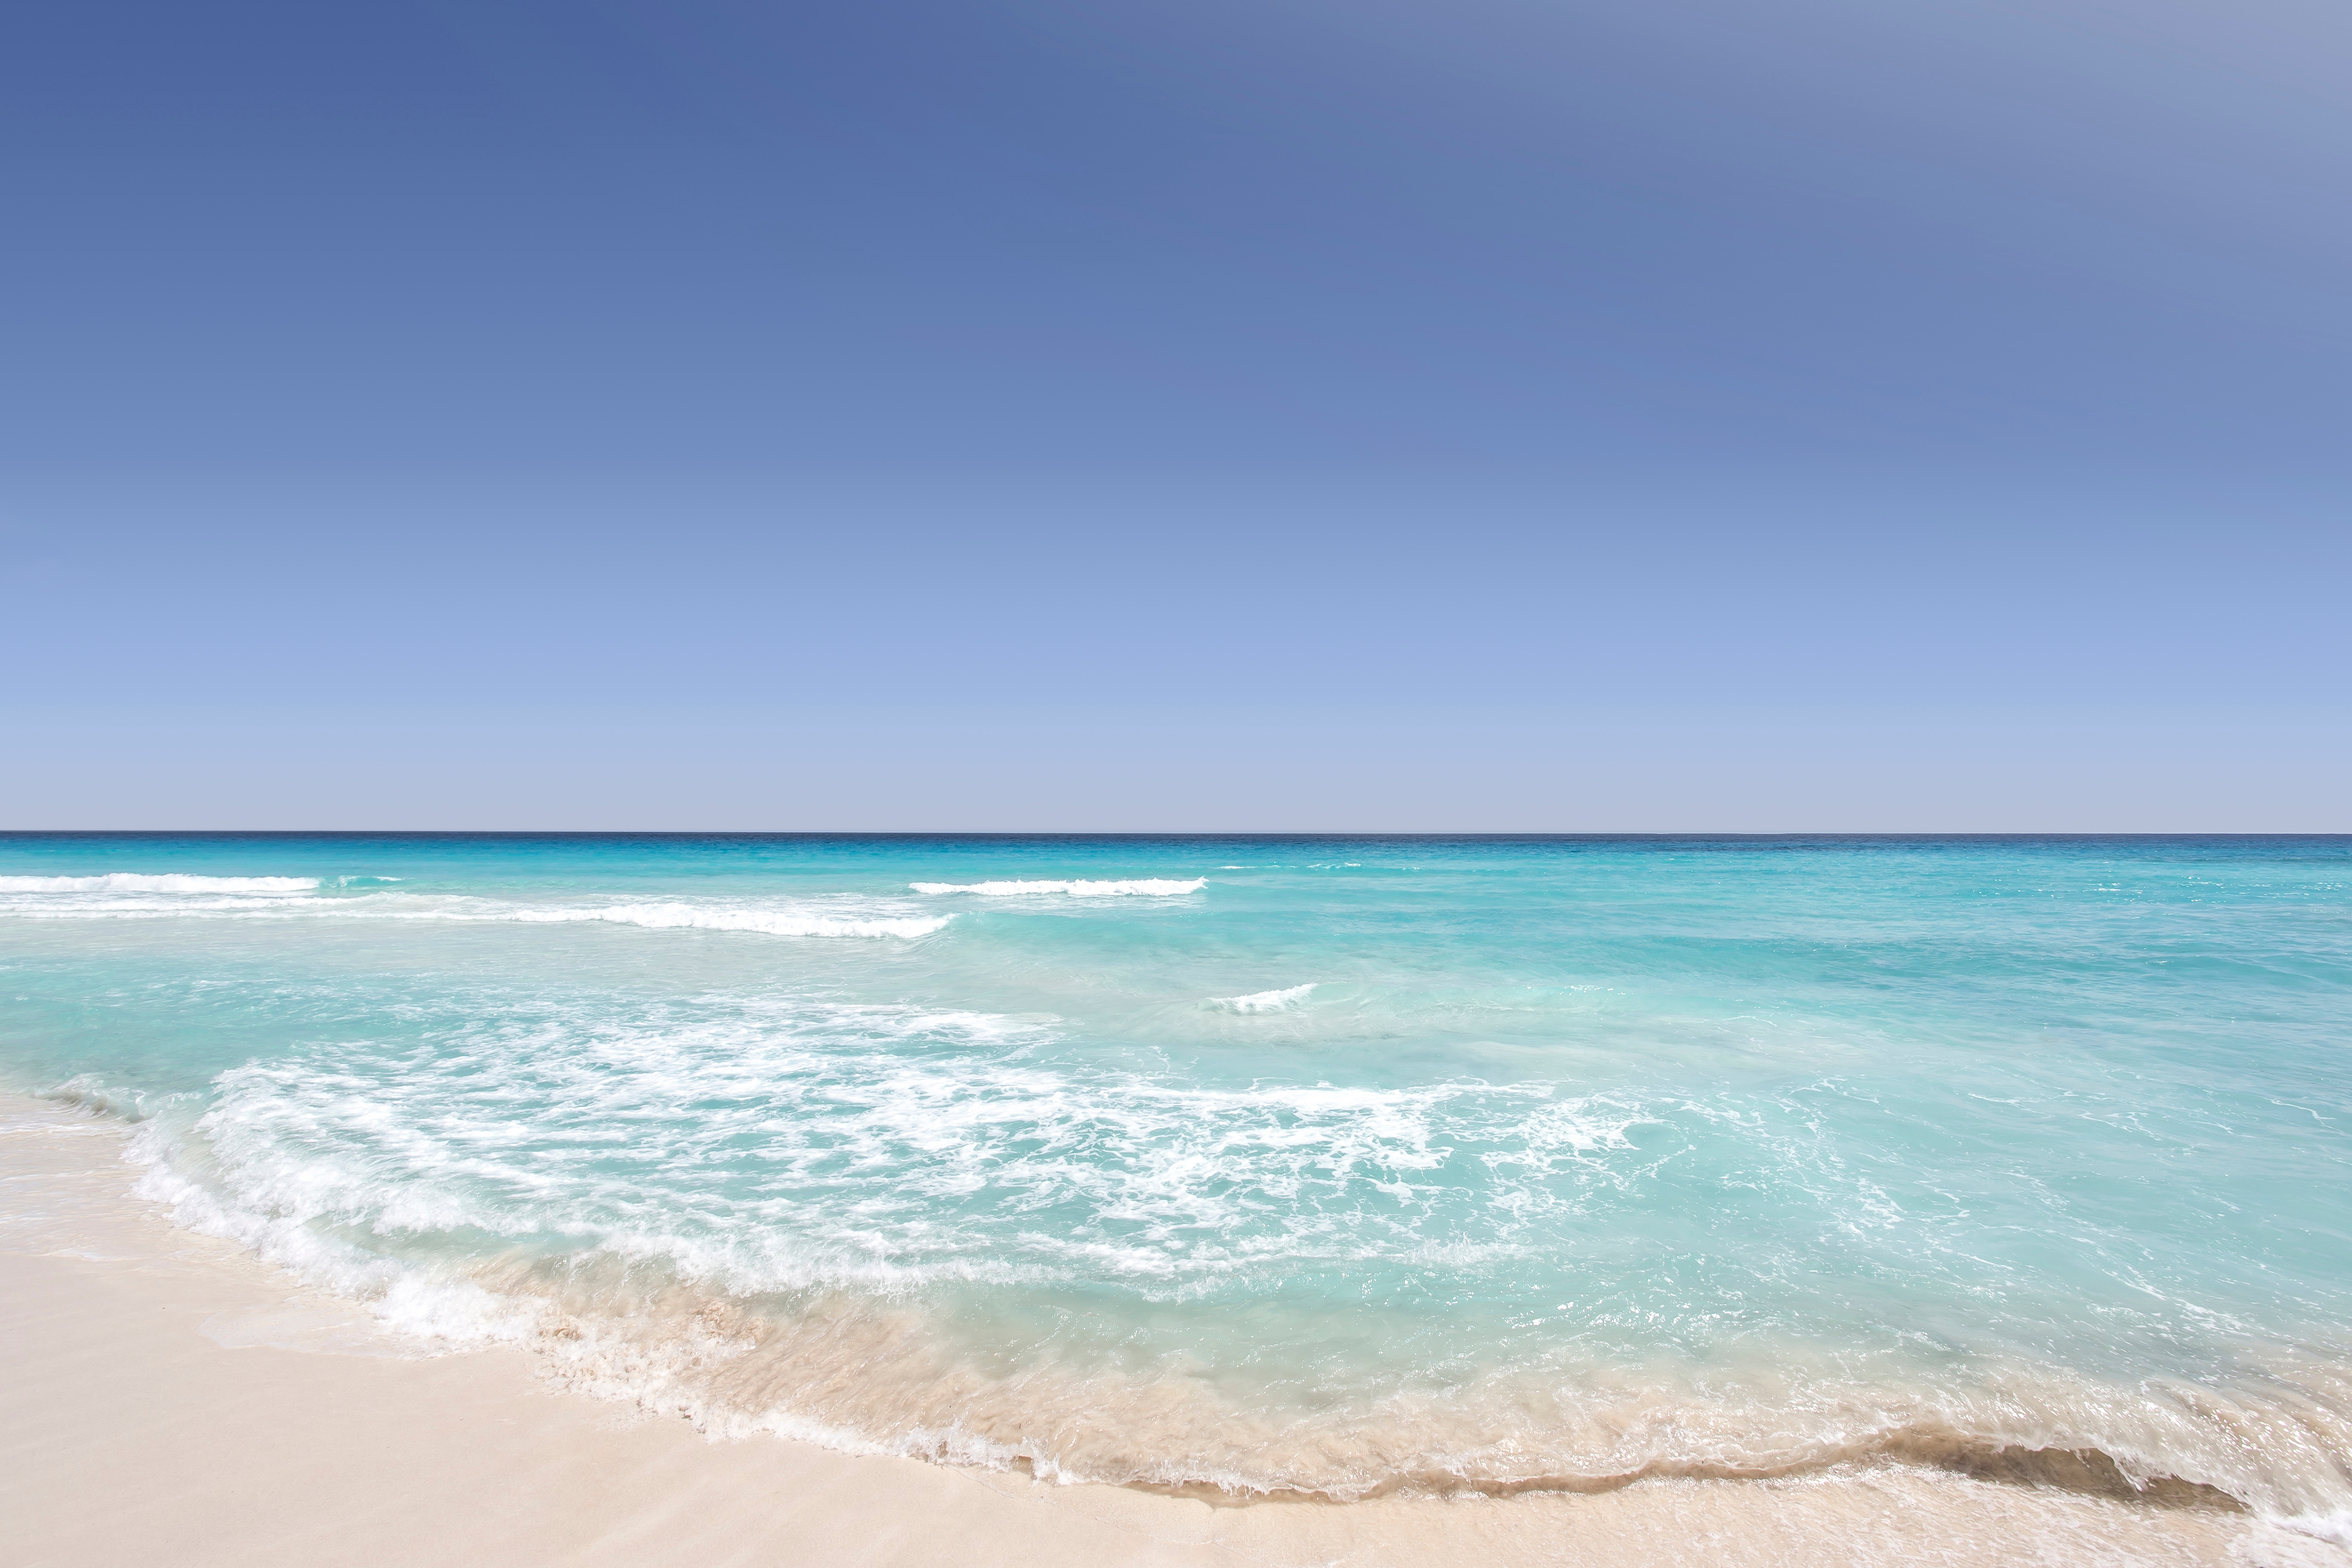 Flight Deal: Fly Nonstop To Cancun For Only $238